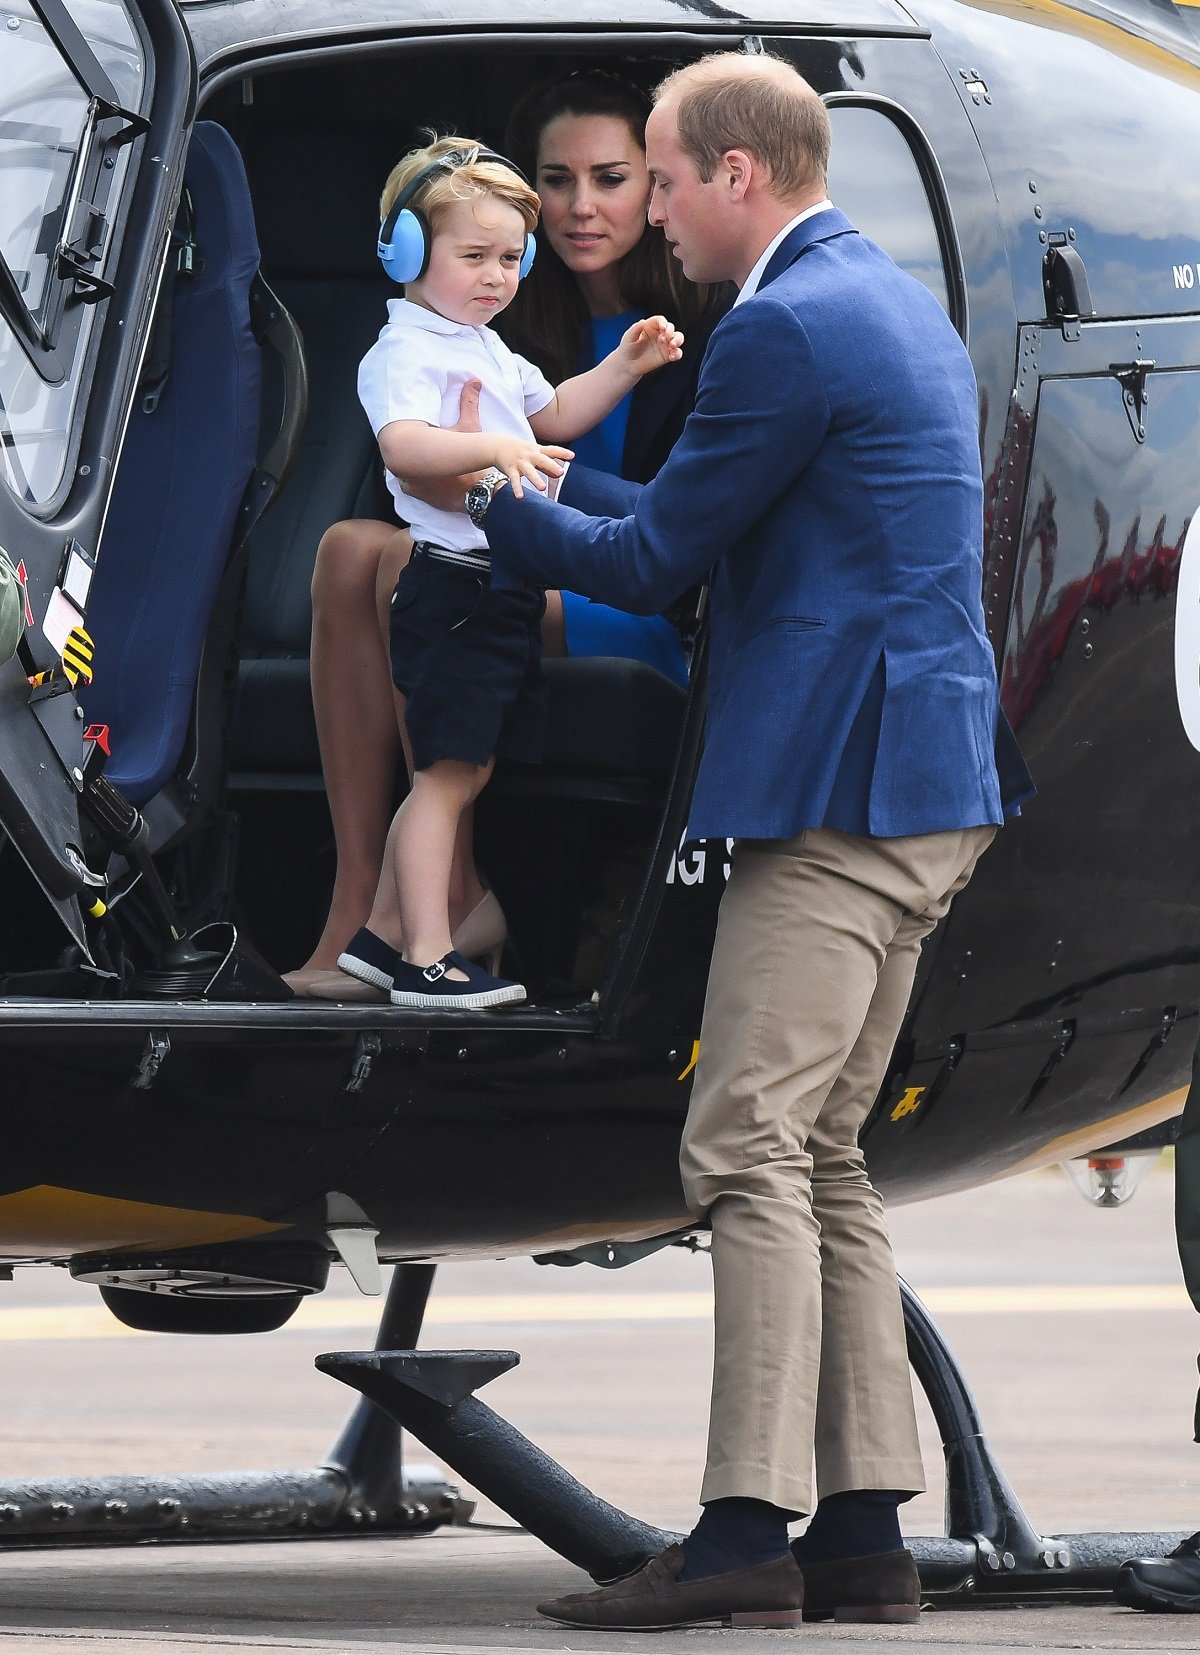 Kate Middleton, Prince George, and Prince William in a helicopter as they attend the The Royal International Air Tattoo